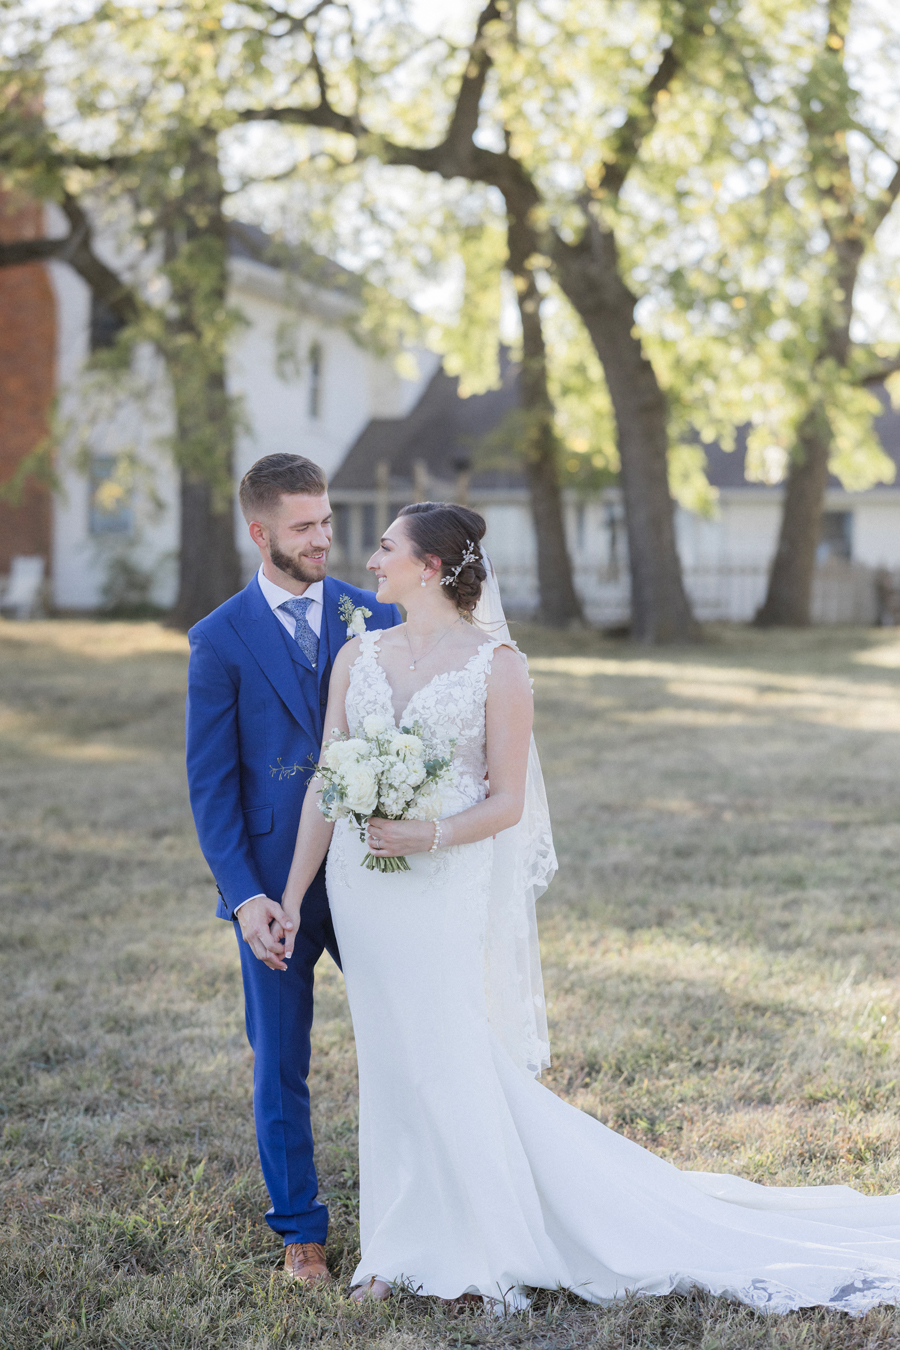 The bride and groom take portraits at their Blue Bell Farm wedding by Missouri wedding photographer Love Tree Studios.